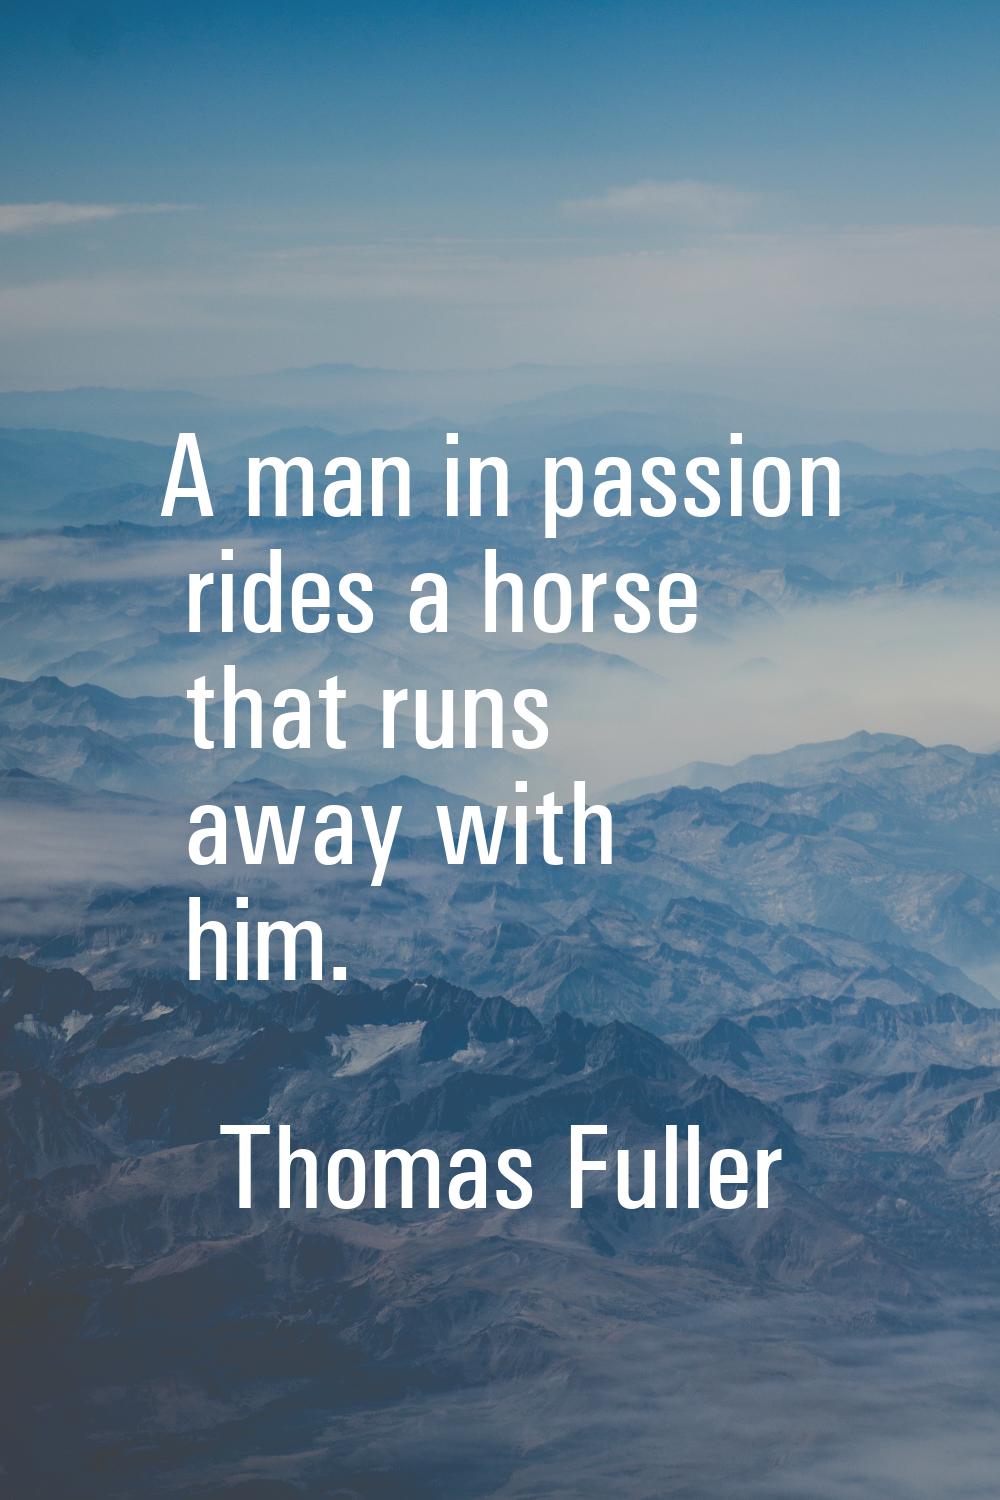 A man in passion rides a horse that runs away with him.